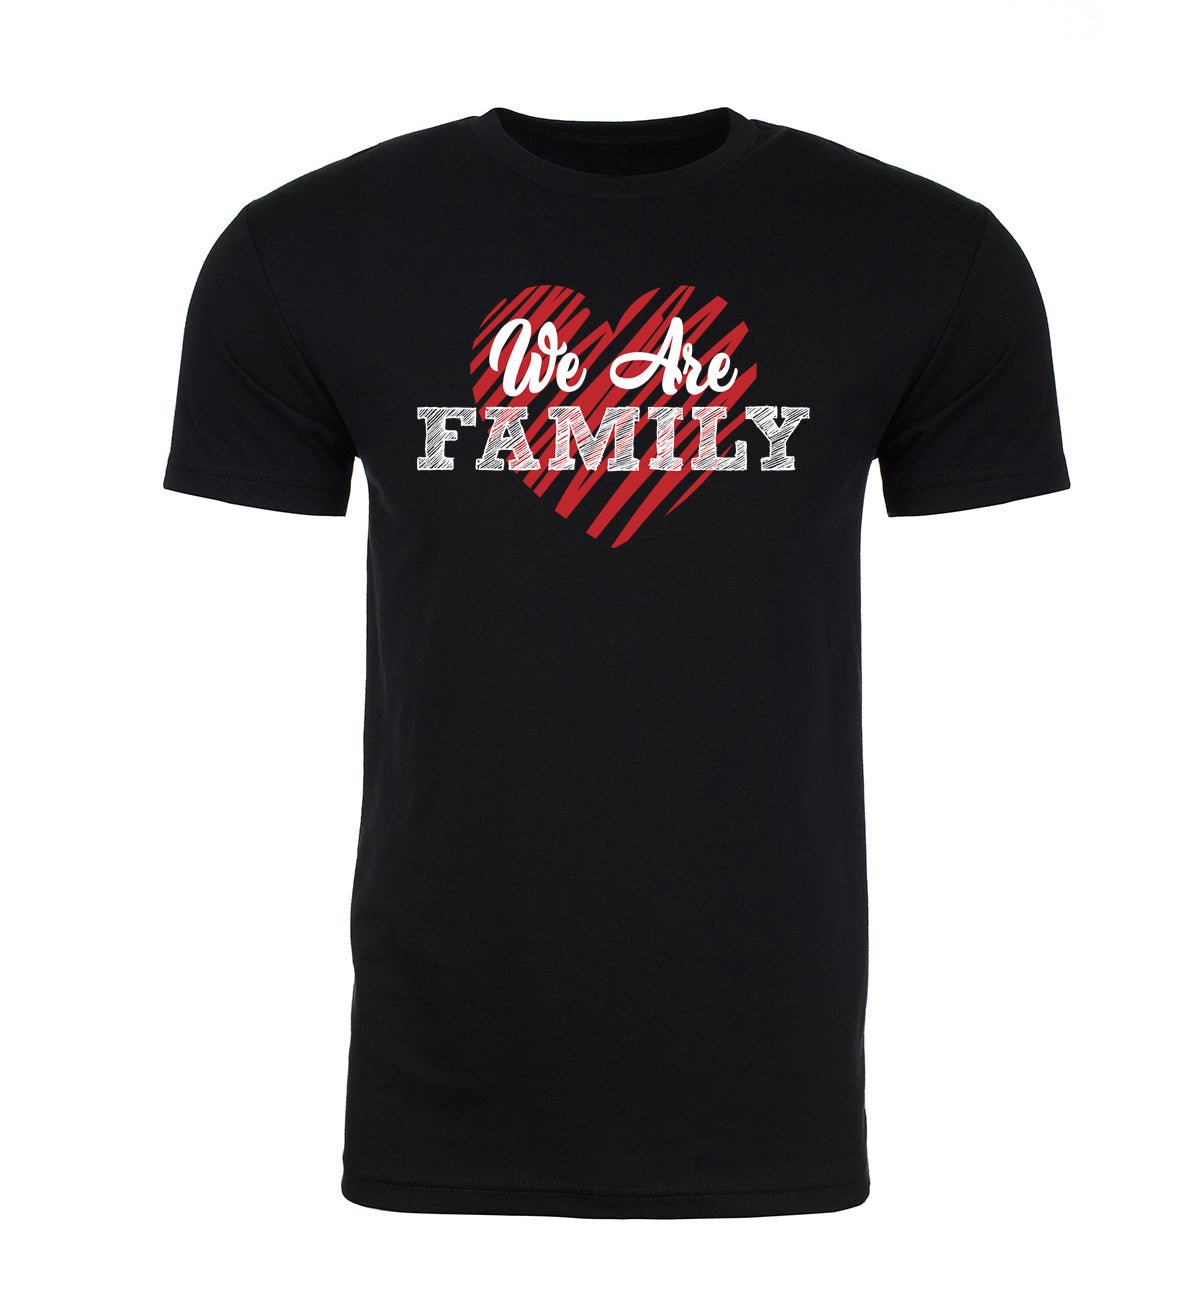 We Are Family - Text in Heart - Unisex T Shirts - Mato & Hash